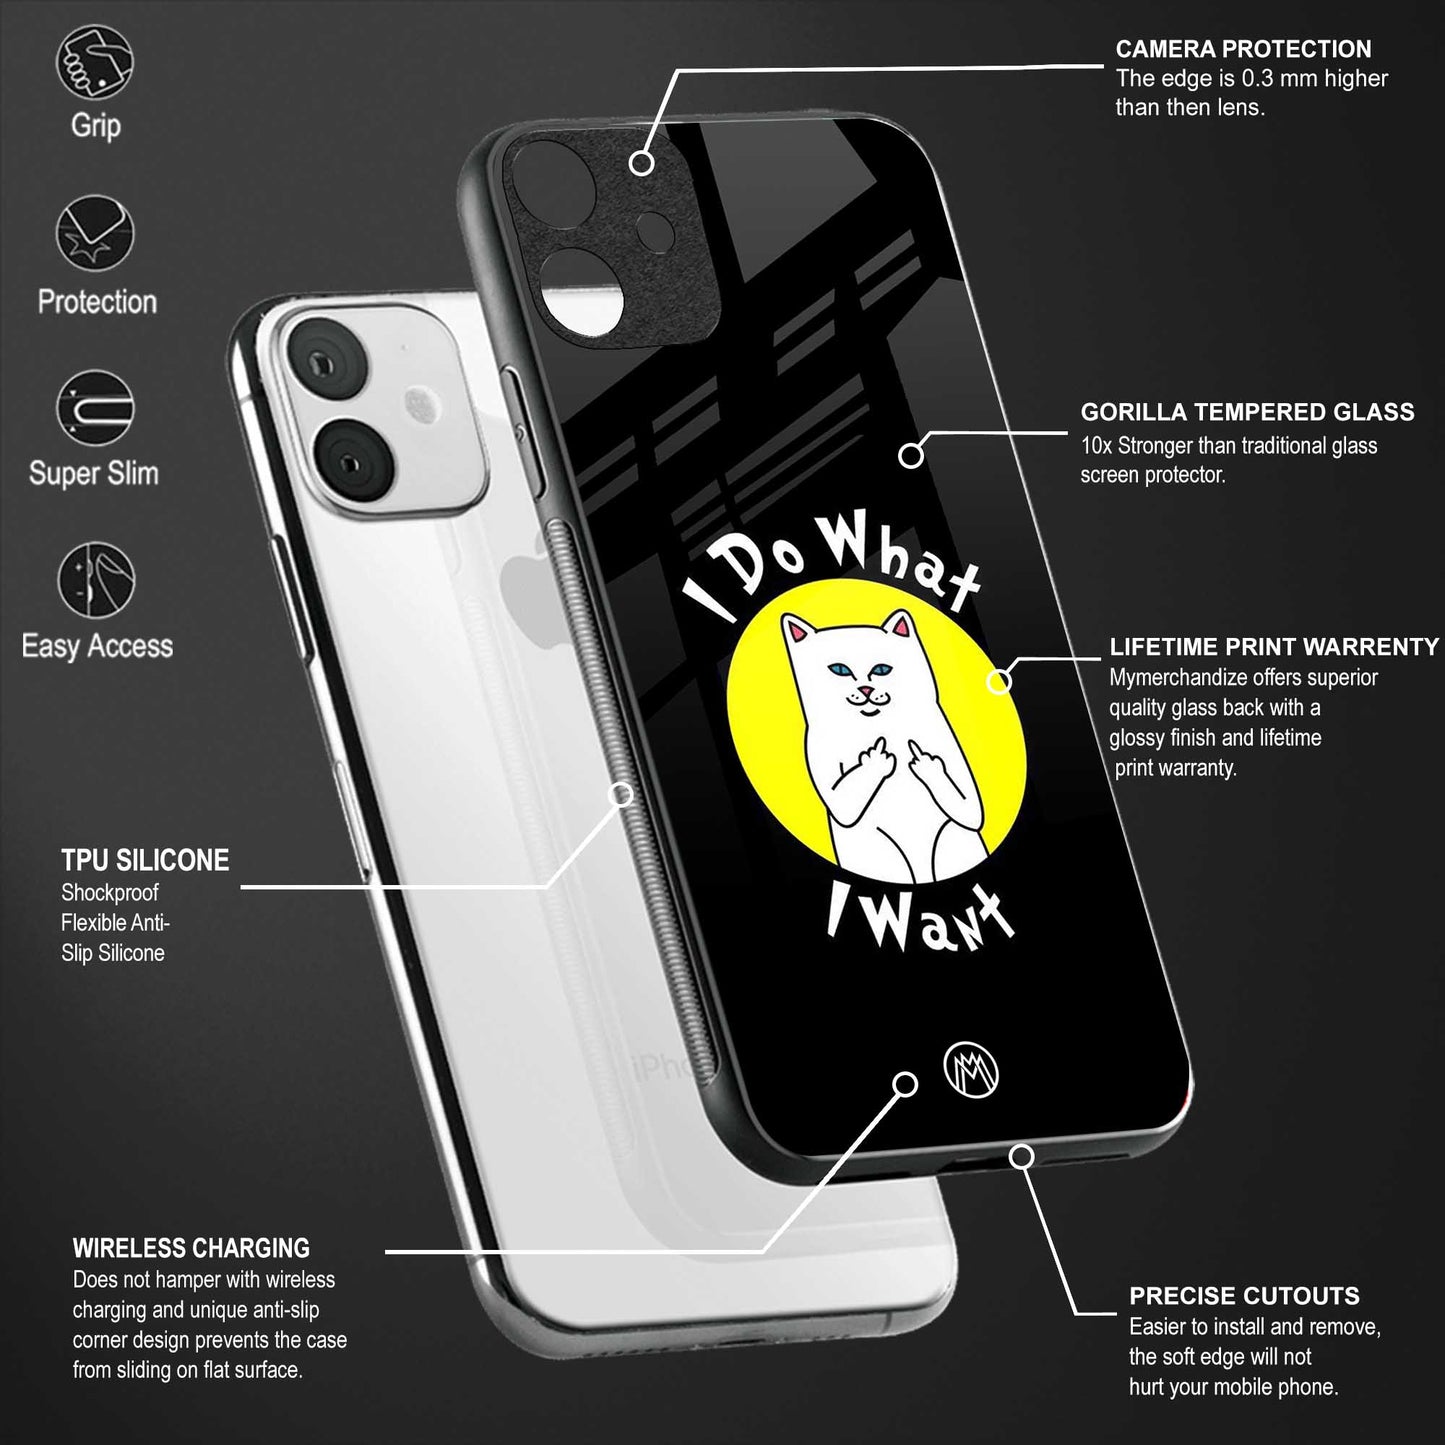 i do what i want glass case for realme 3 pro